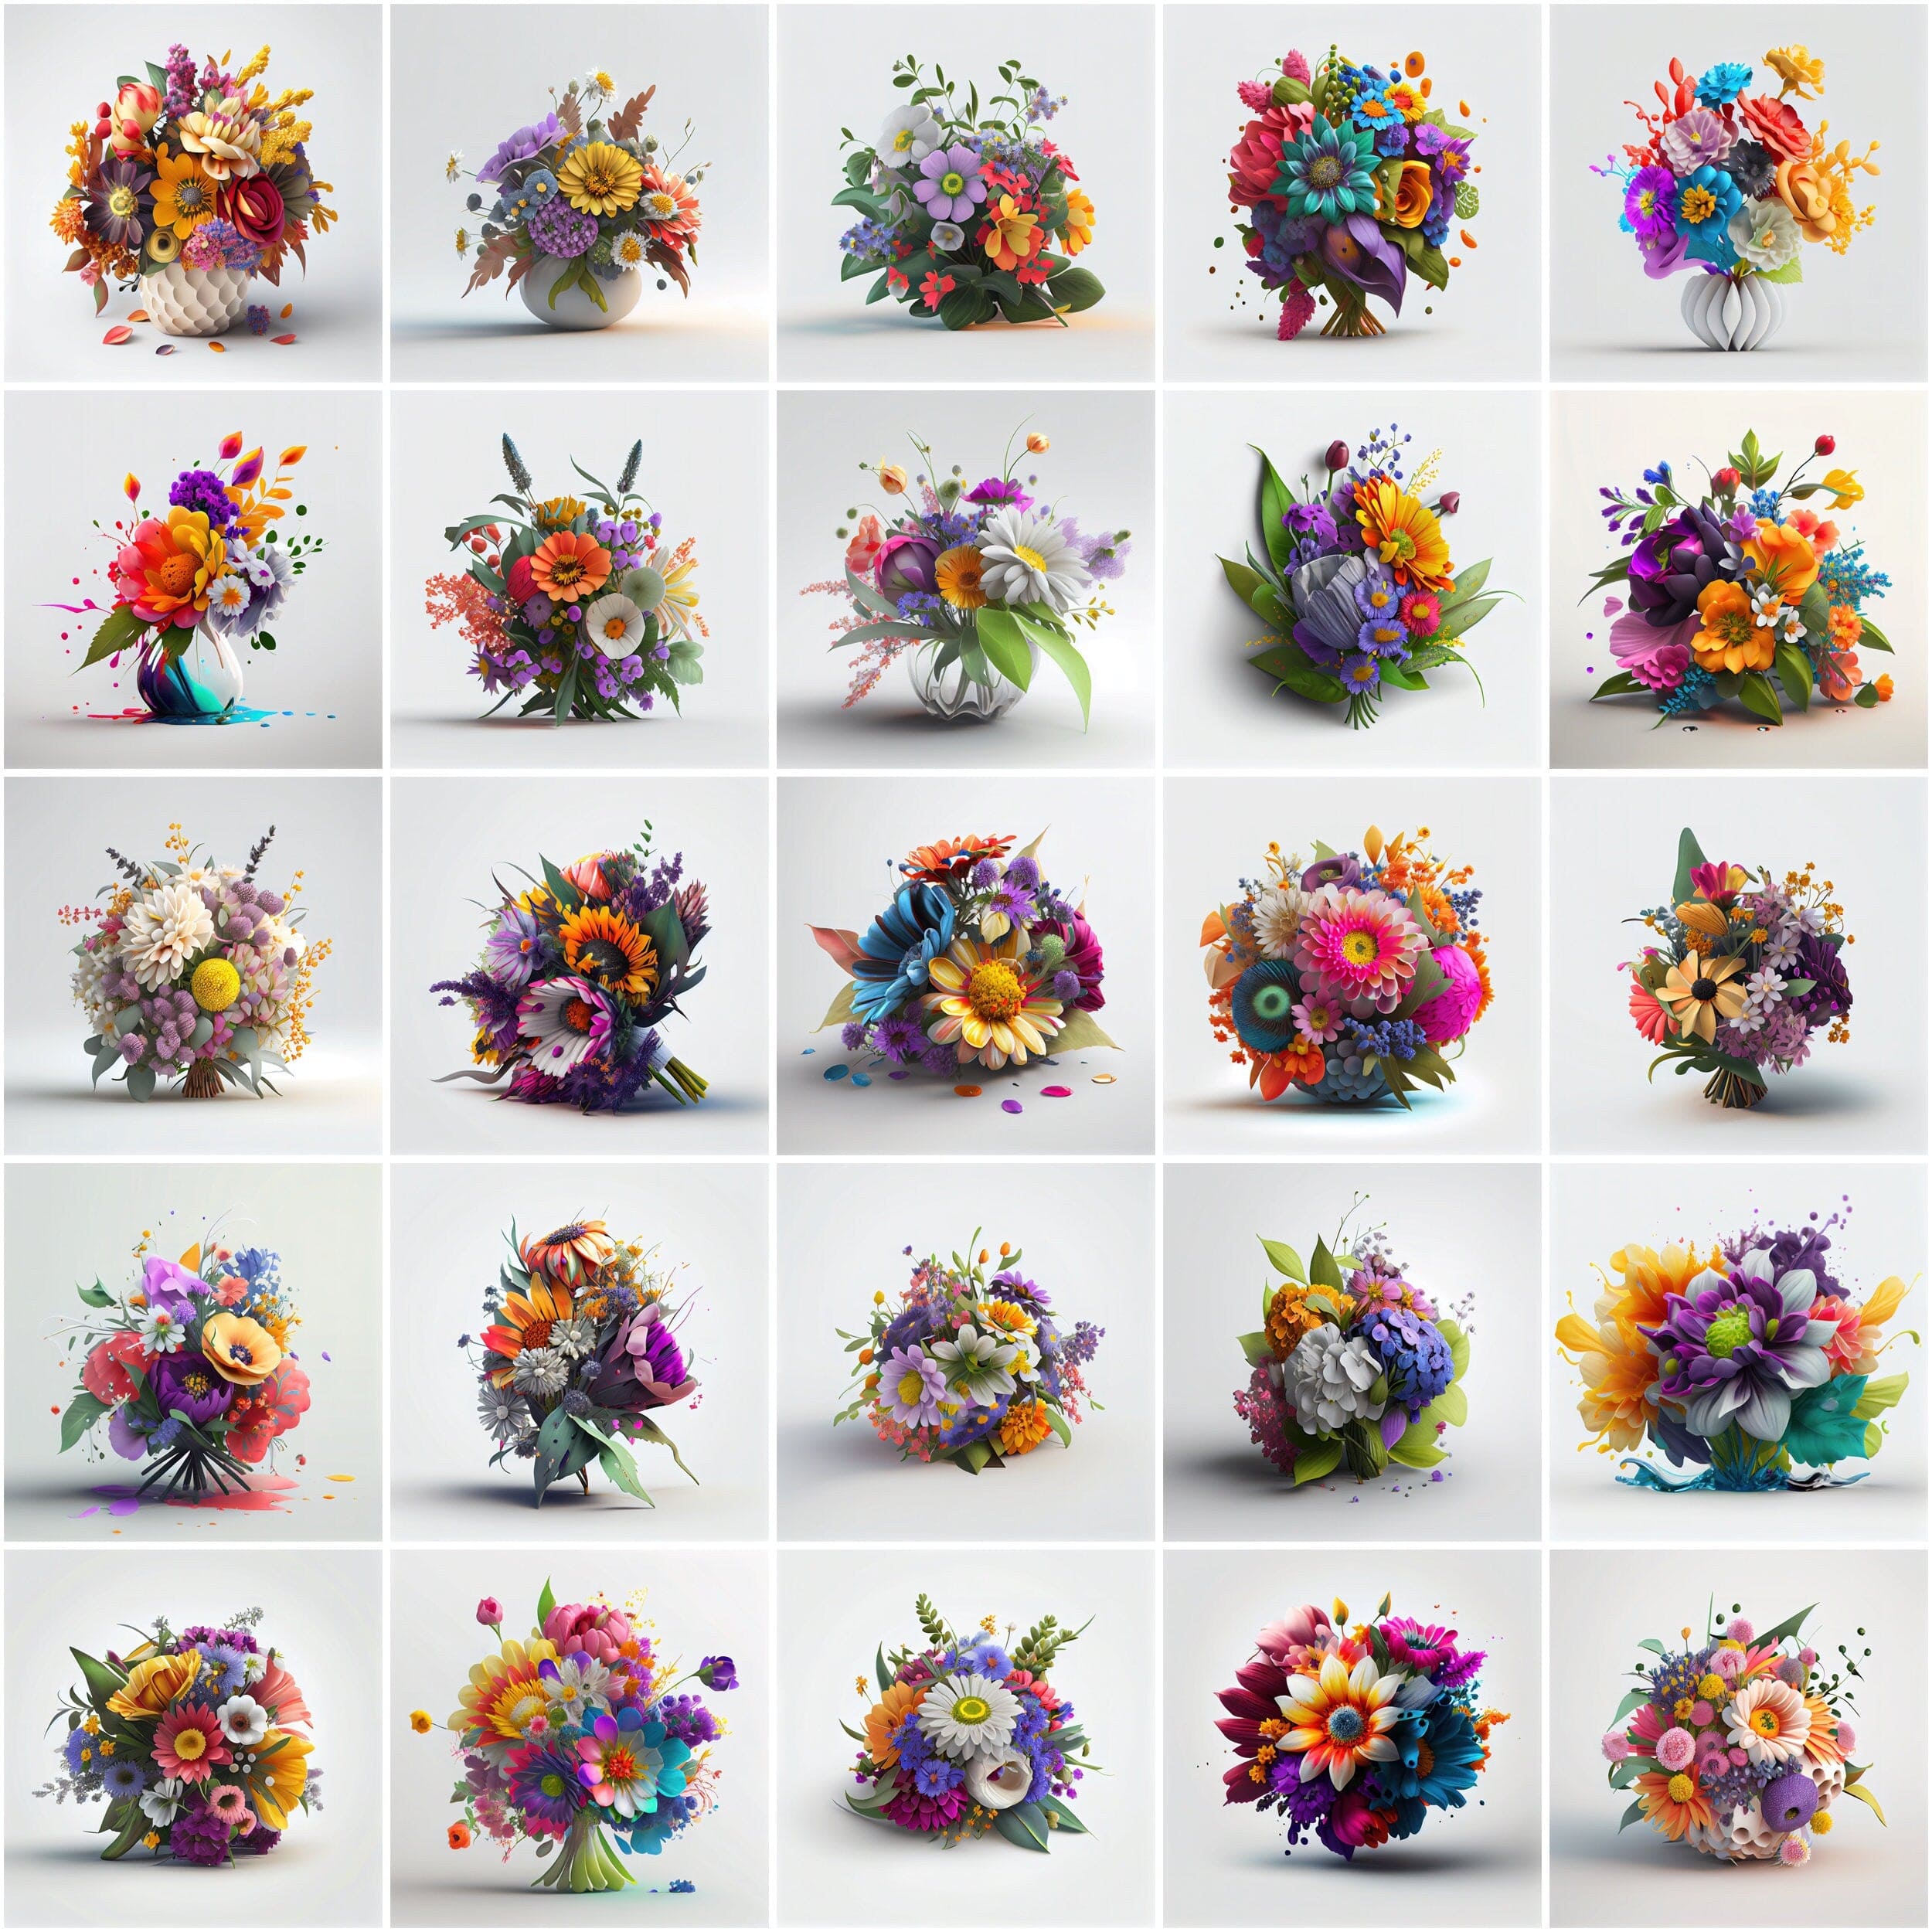 Blooming Beauty: 340 Stunning Bouquet Images - Add a Touch of Elegance to Your Designs with Our High-Resolution Image Bundle Digital Download Sumobundle